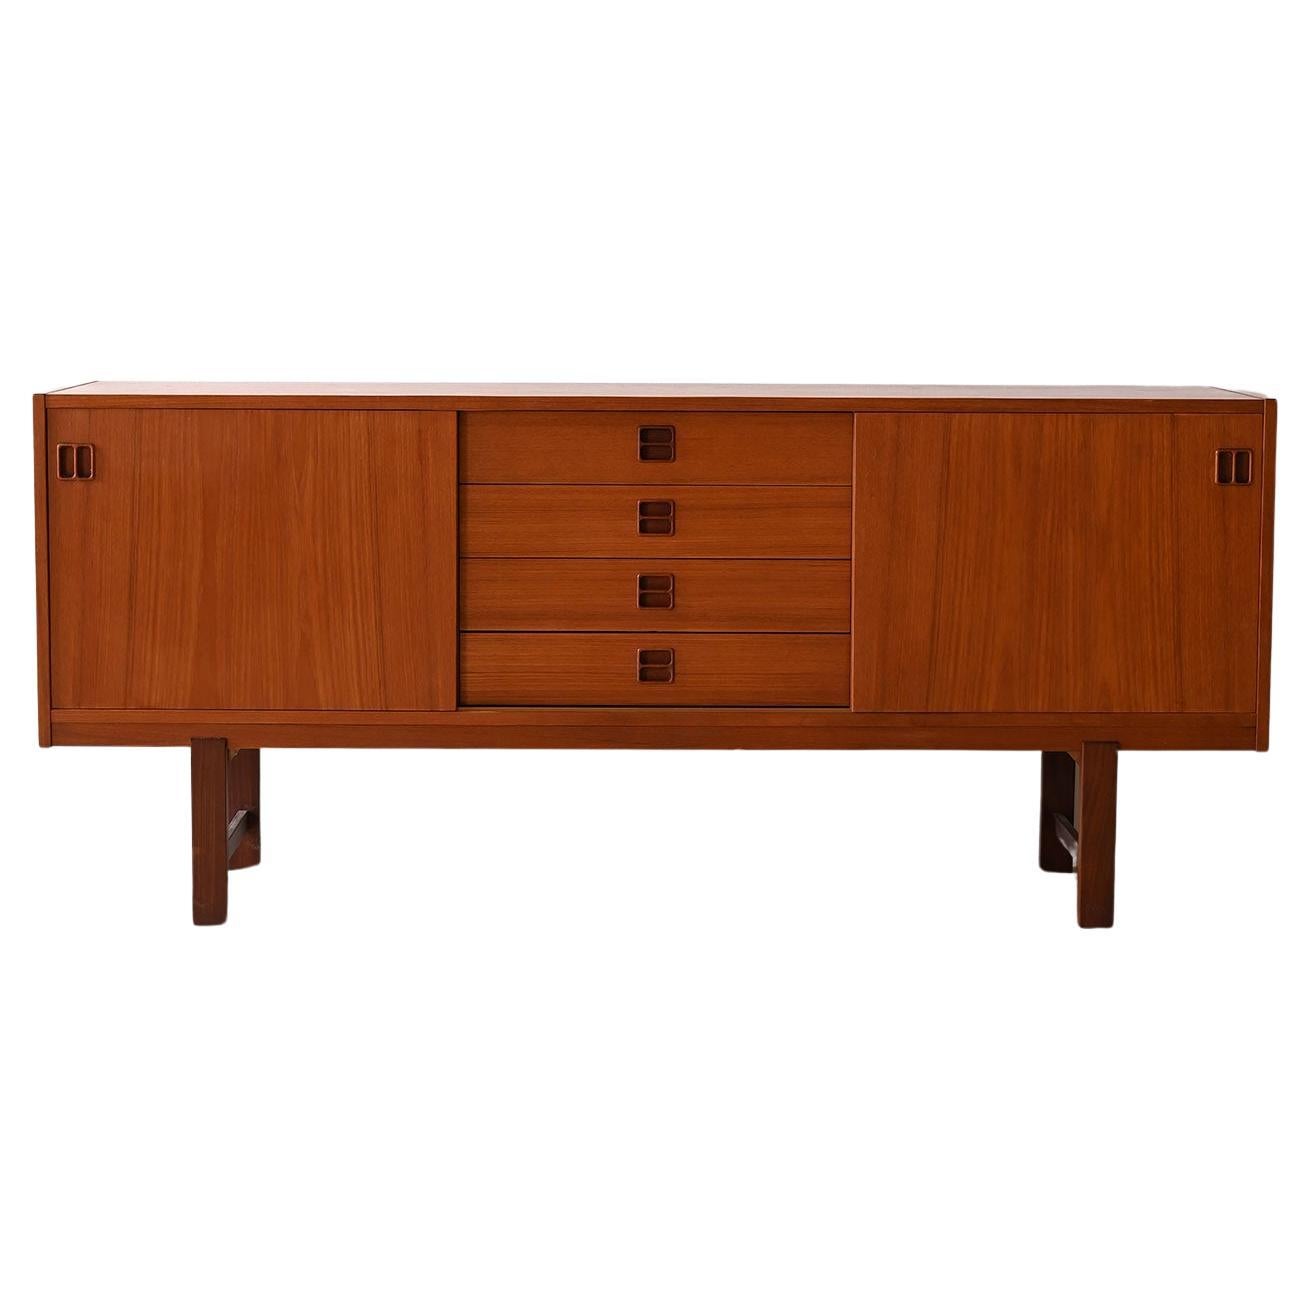 Sideboard with center drawers from the 1960s